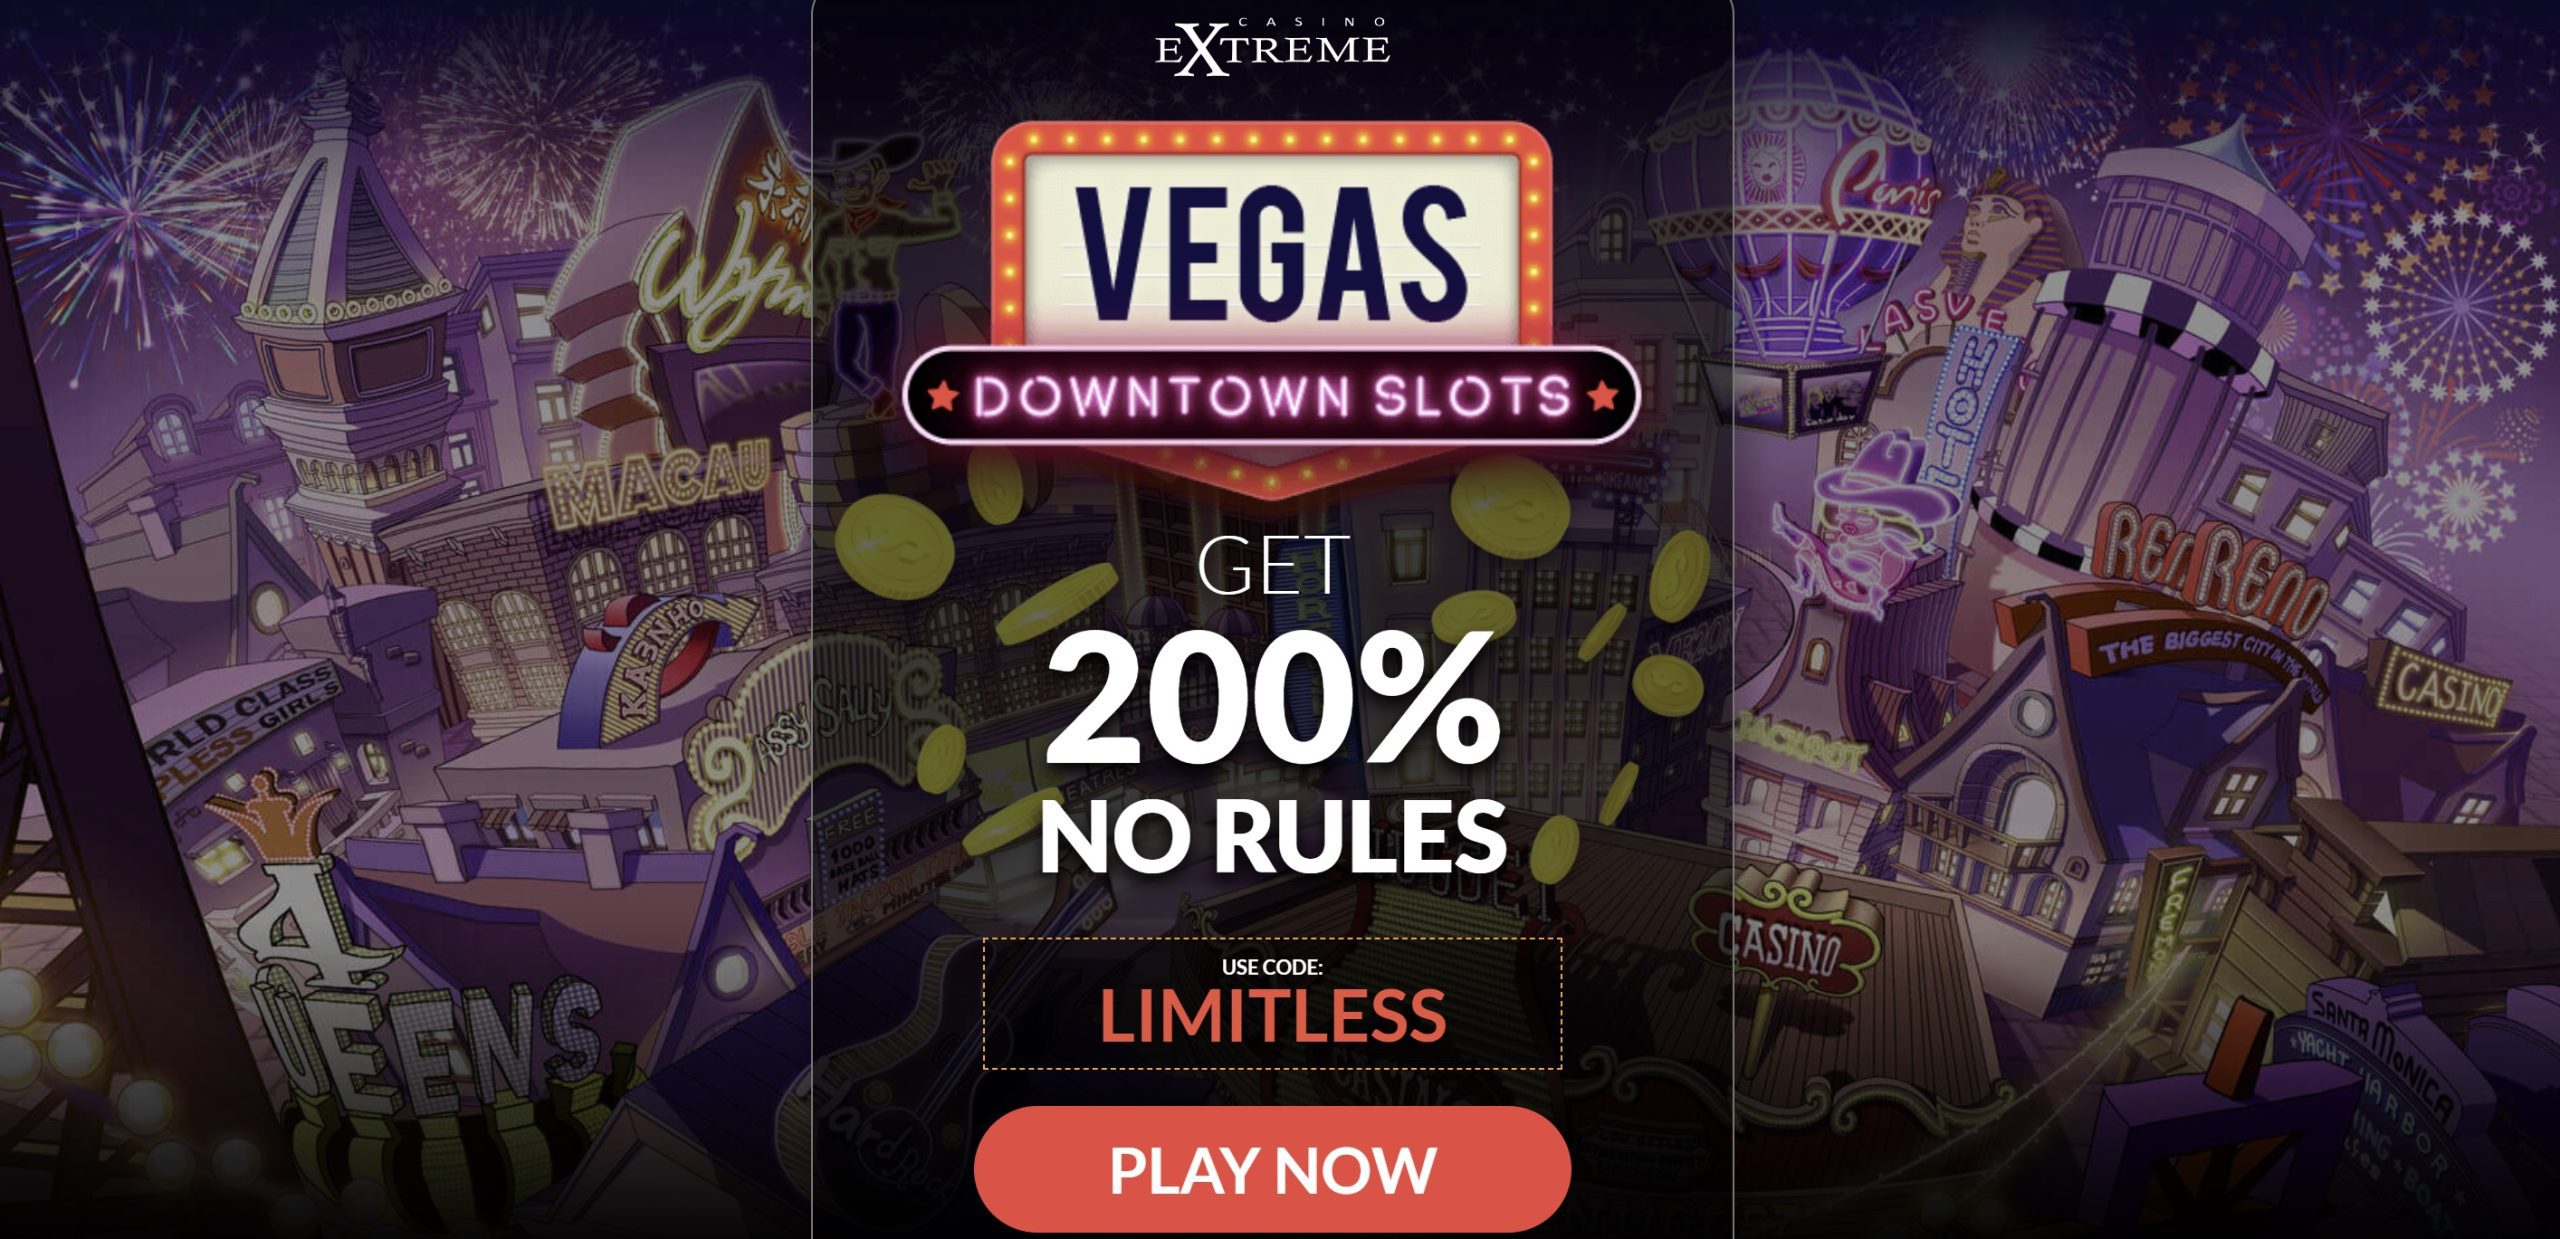 Casino Extreme Best Offer